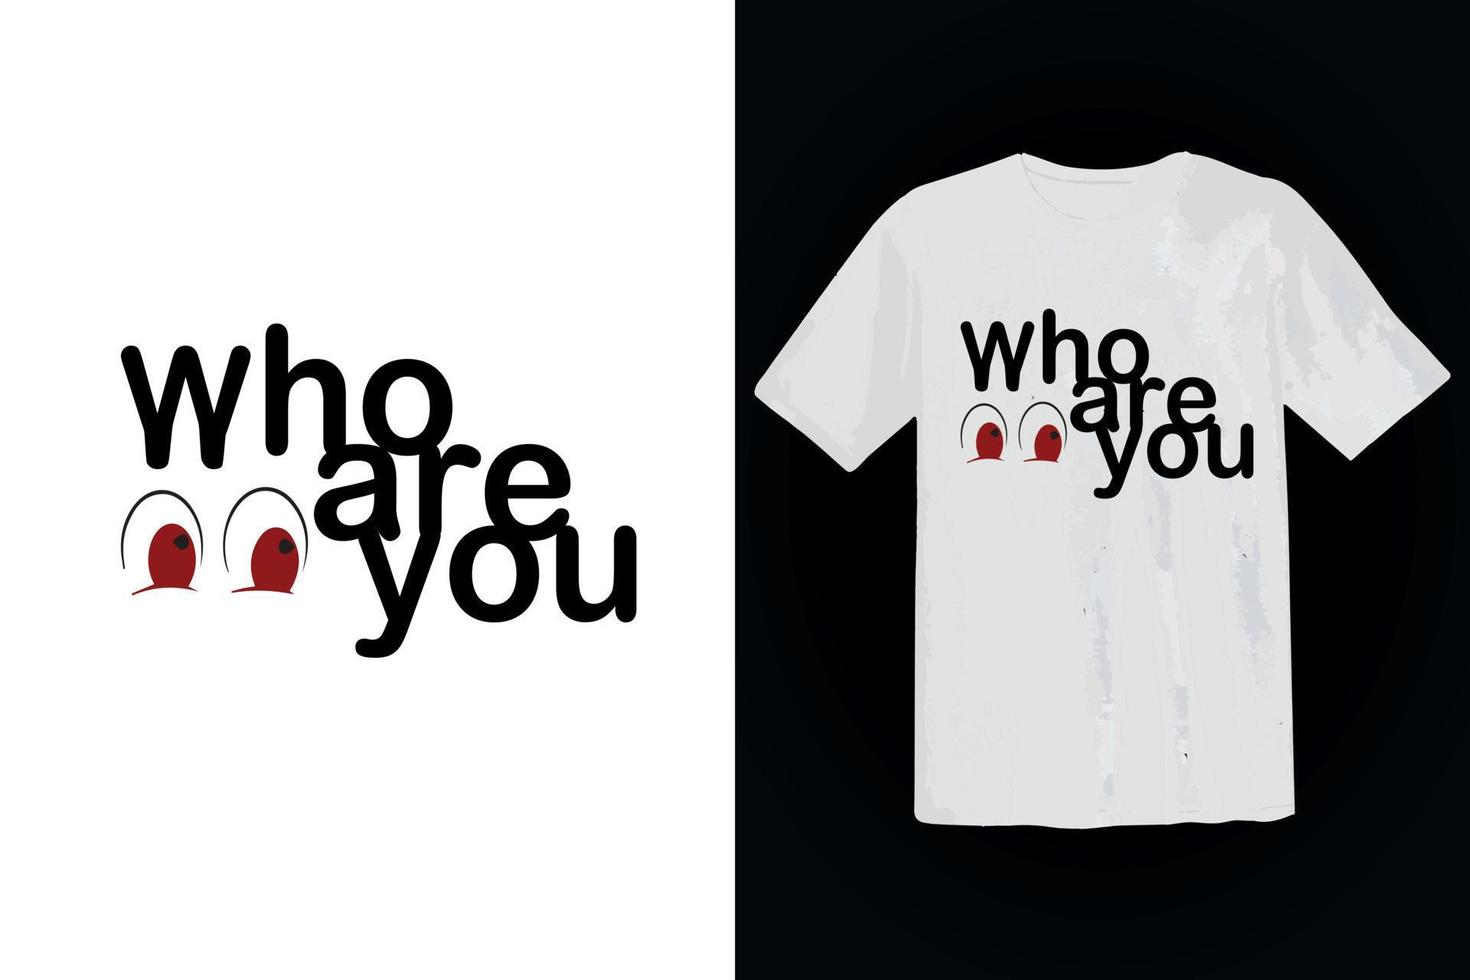 who are you typography t shirt design template vector mockup illustration. high quality vector design